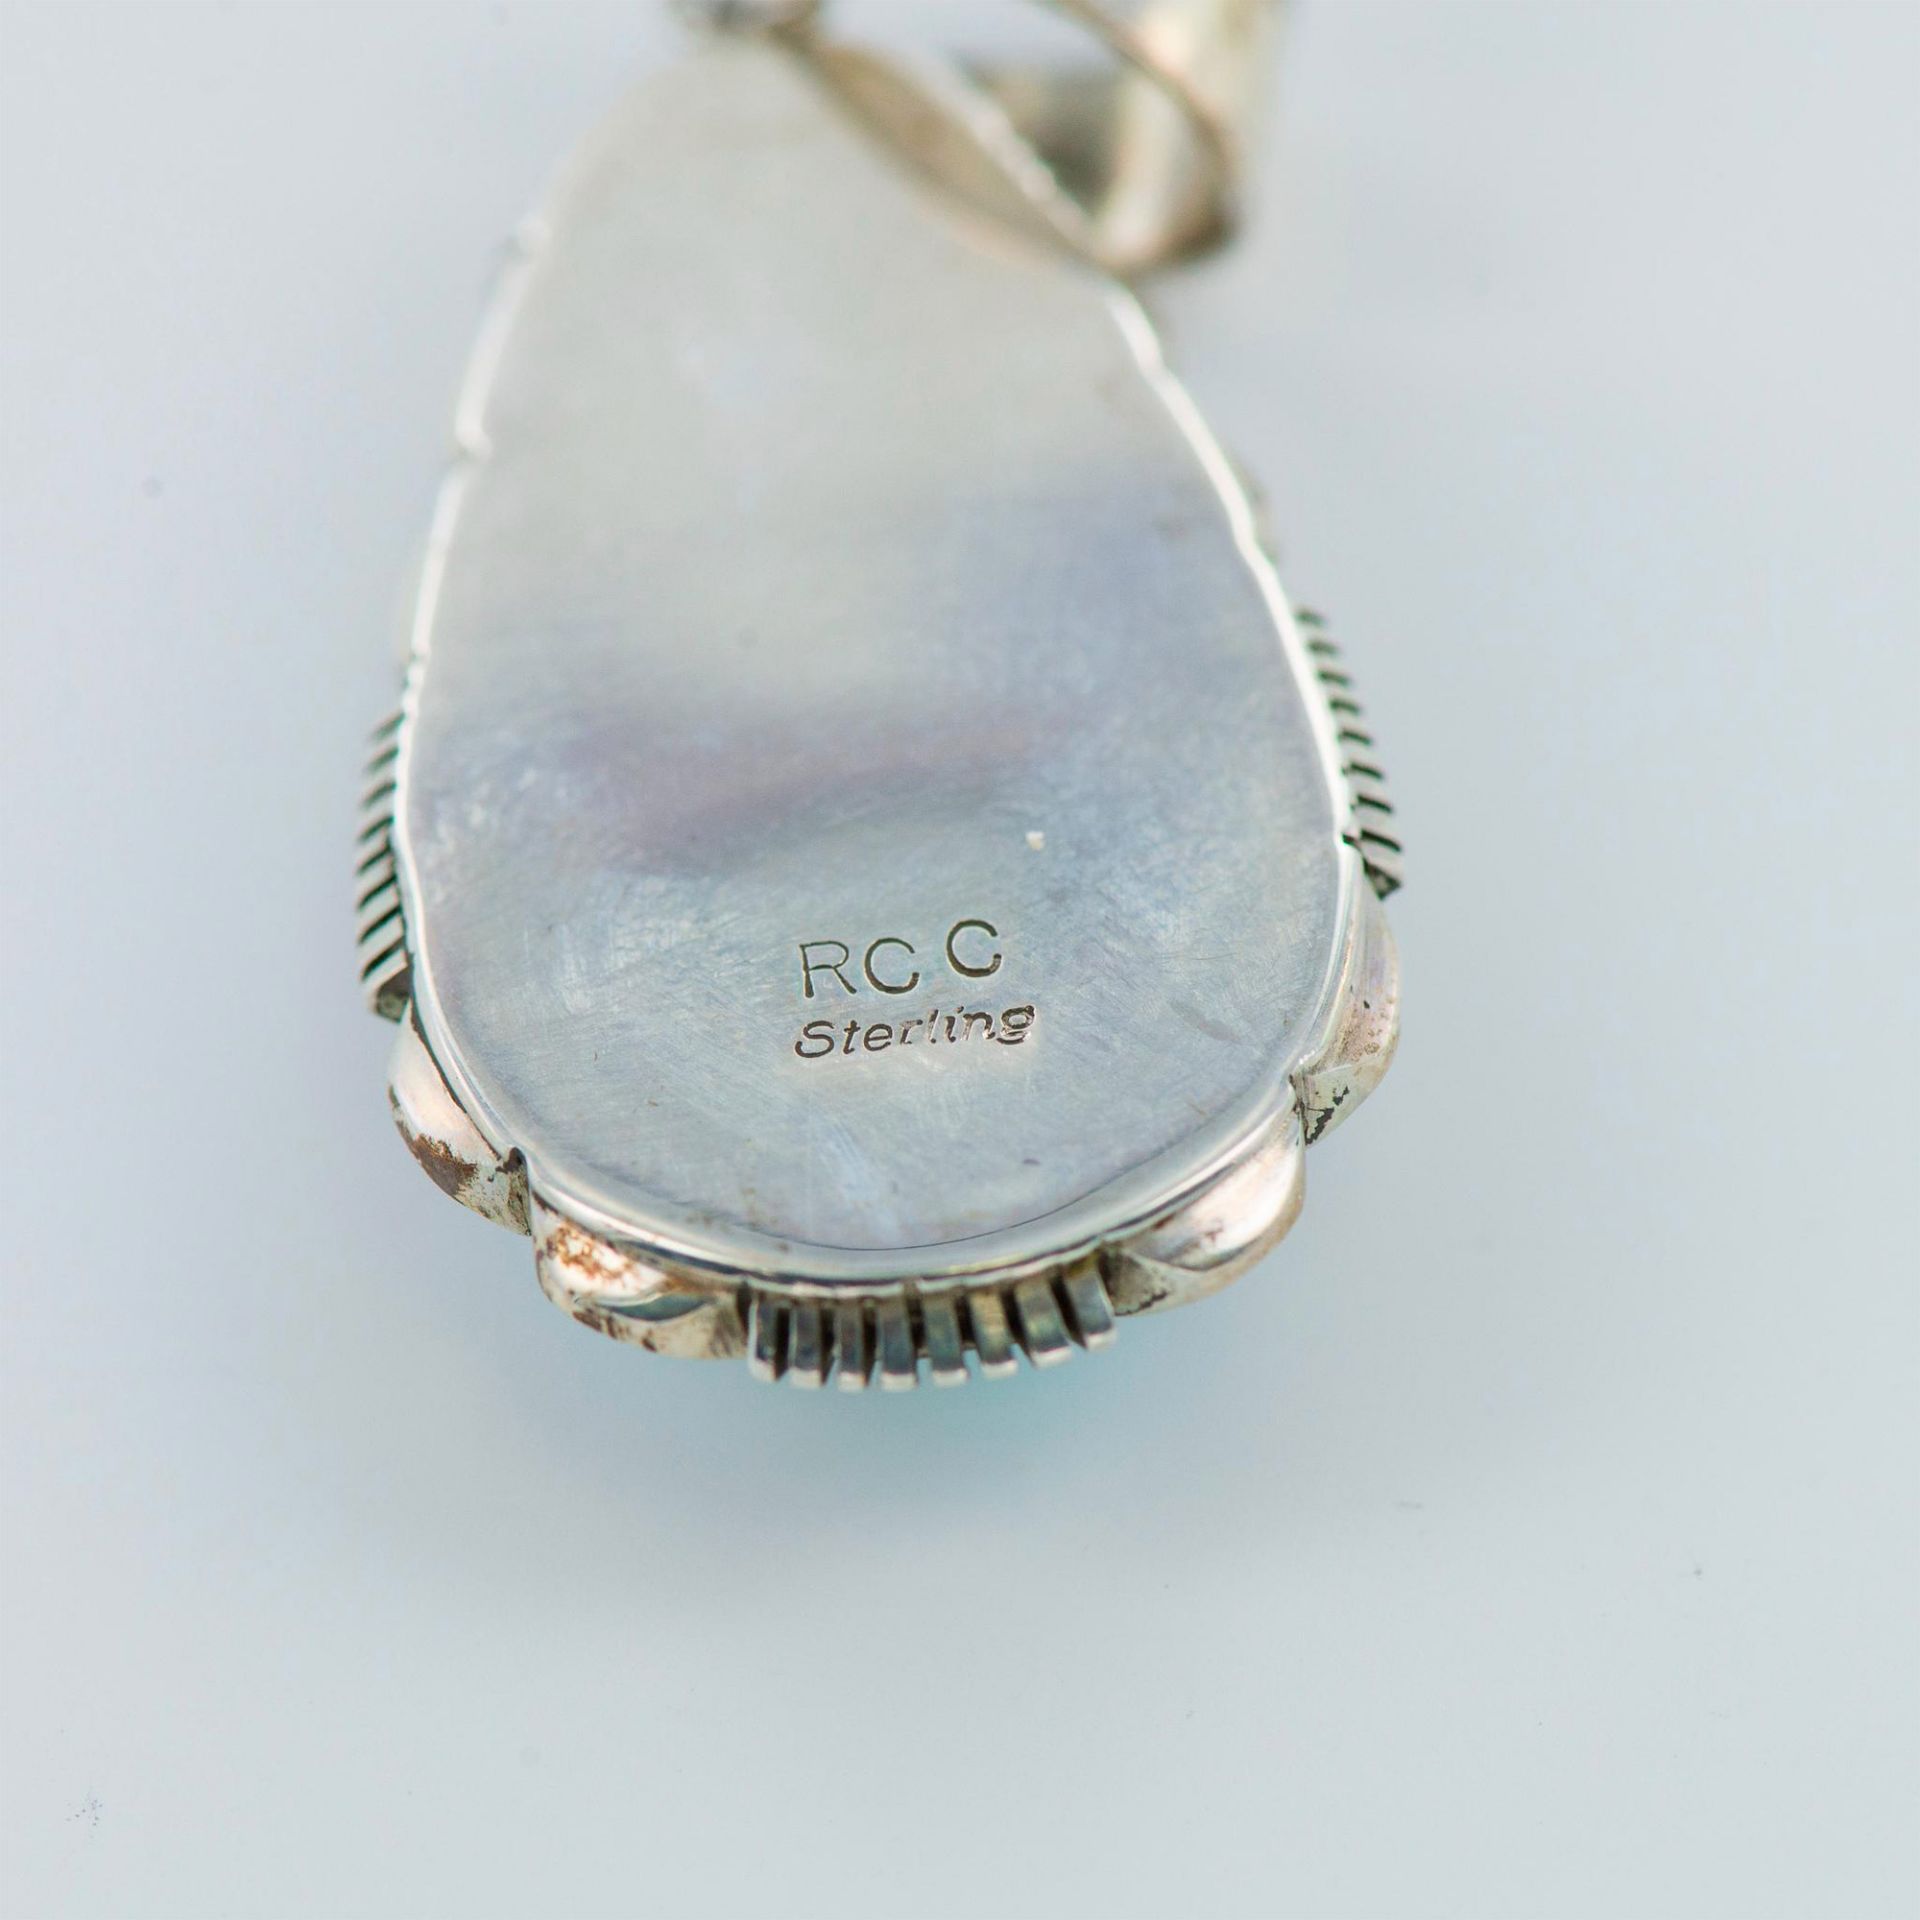 Richard Curley Sterling Silver and Turquoise Pendant - Image 4 of 6